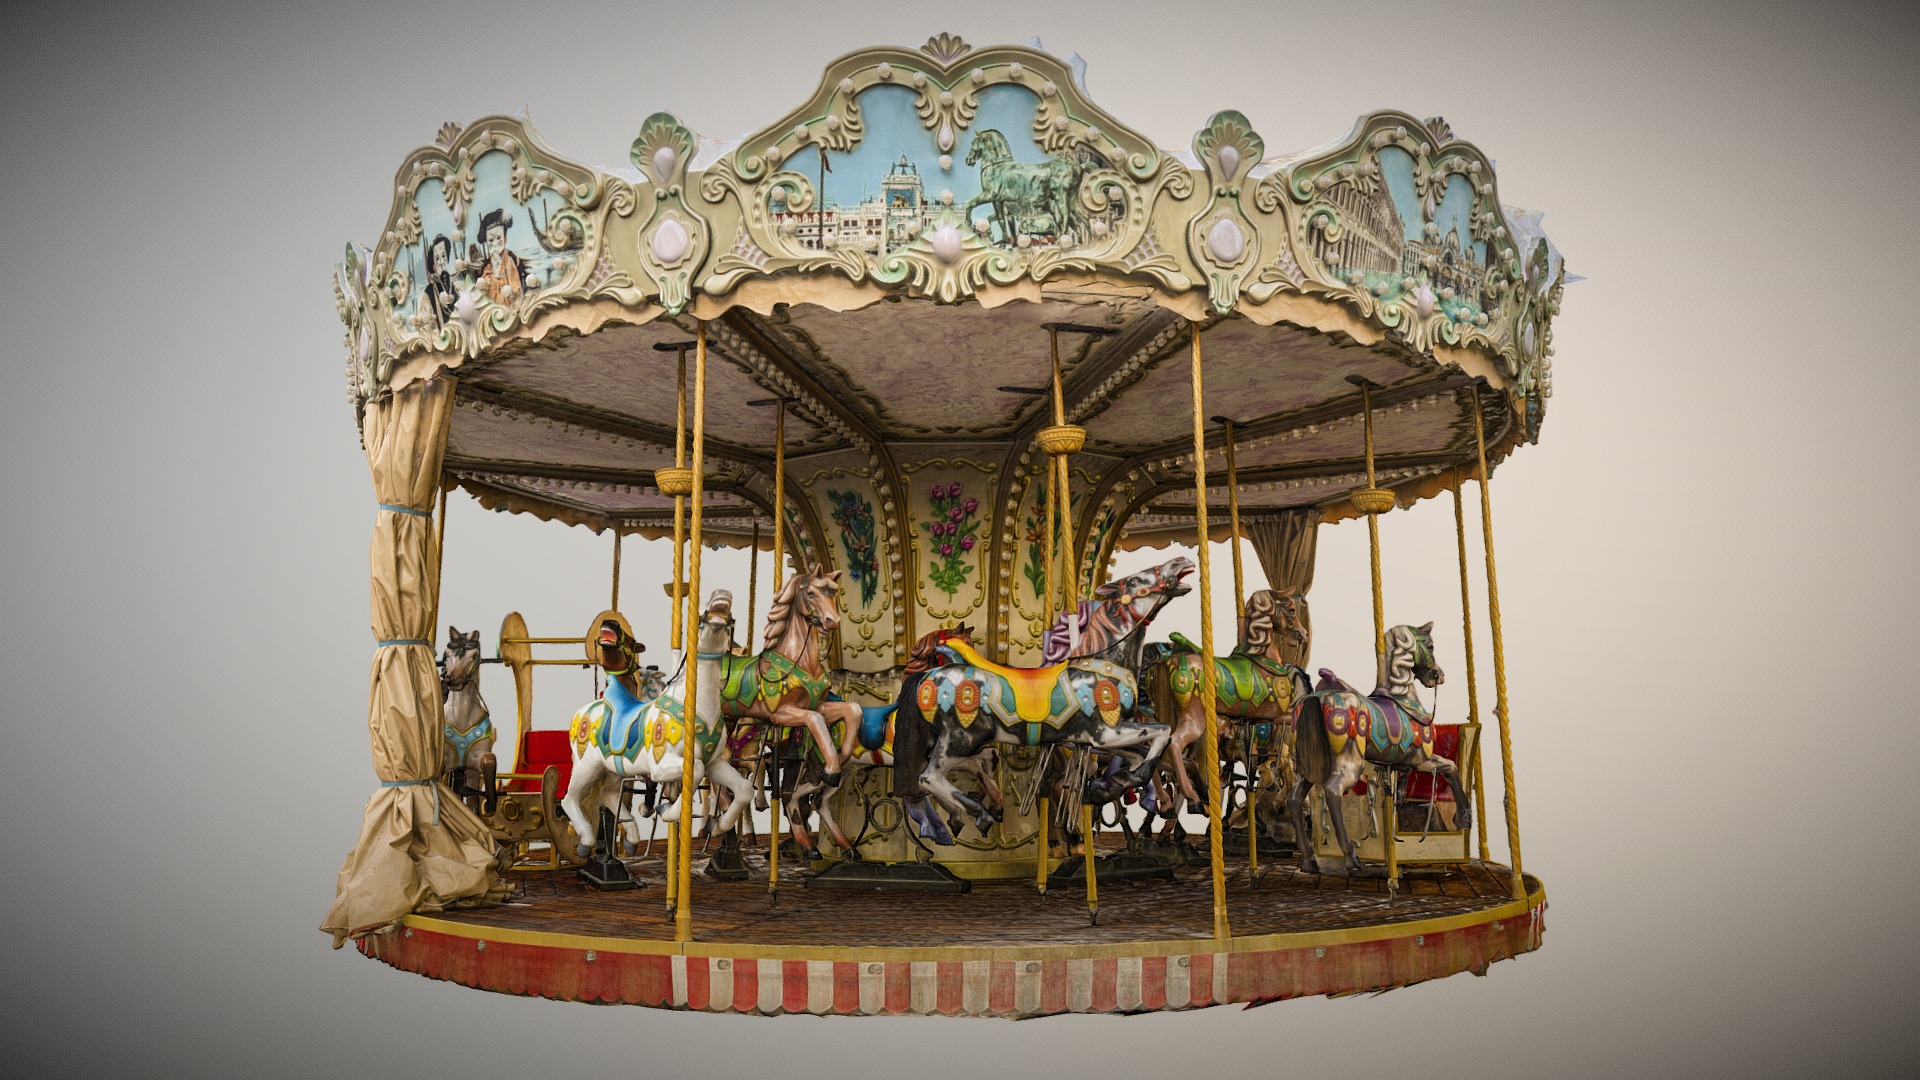 3D model carousel photogrammetry scan - This is a 3D model of the carousel photogrammetry scan. The 3D model is about a carousel with people on it.